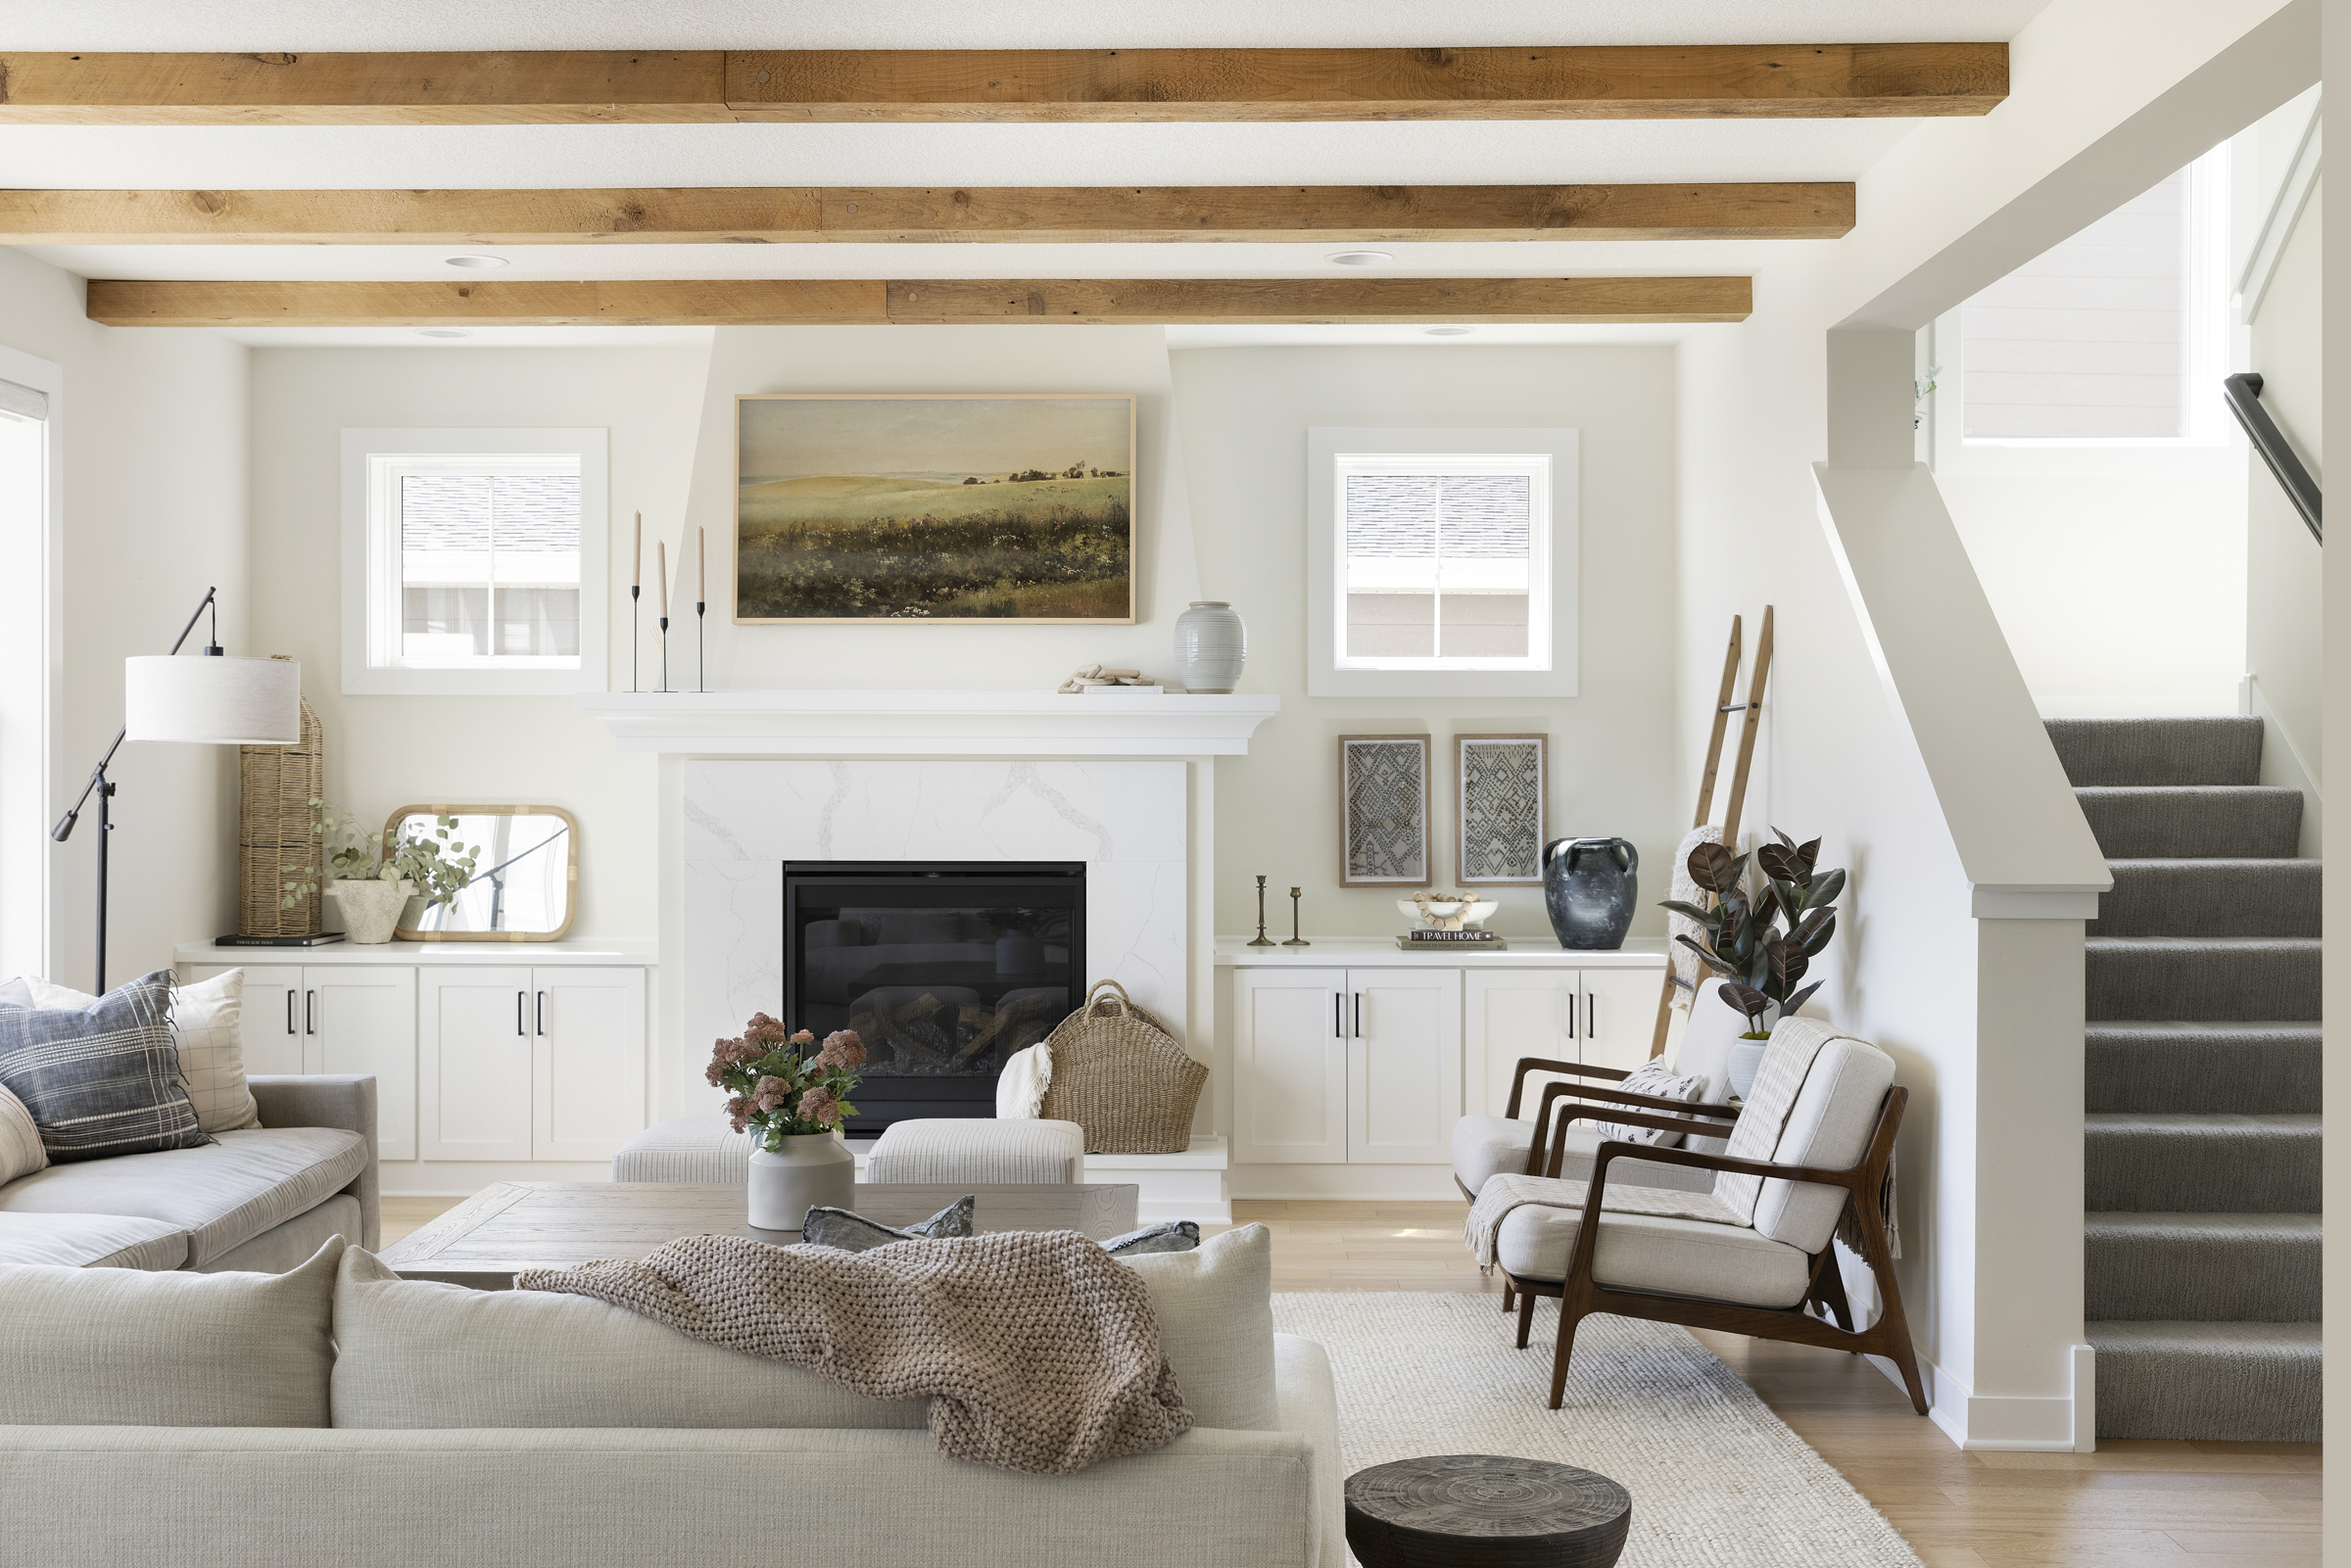 The Art of Styling Homes 7